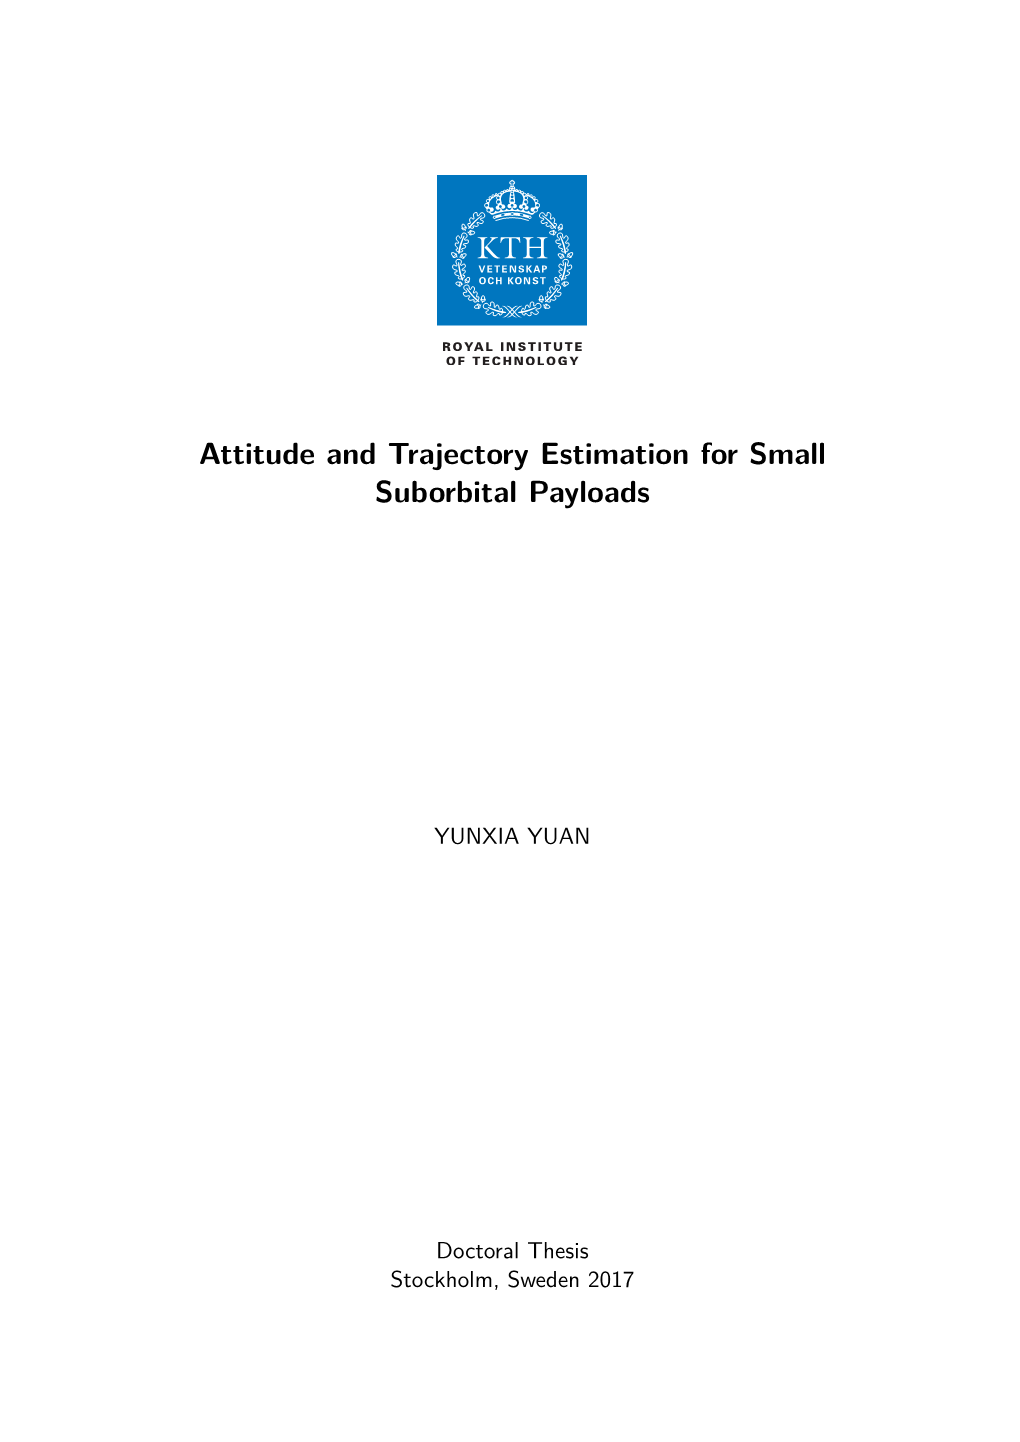 Attitude and Trajectory Estimation for Small Suborbital Payloads